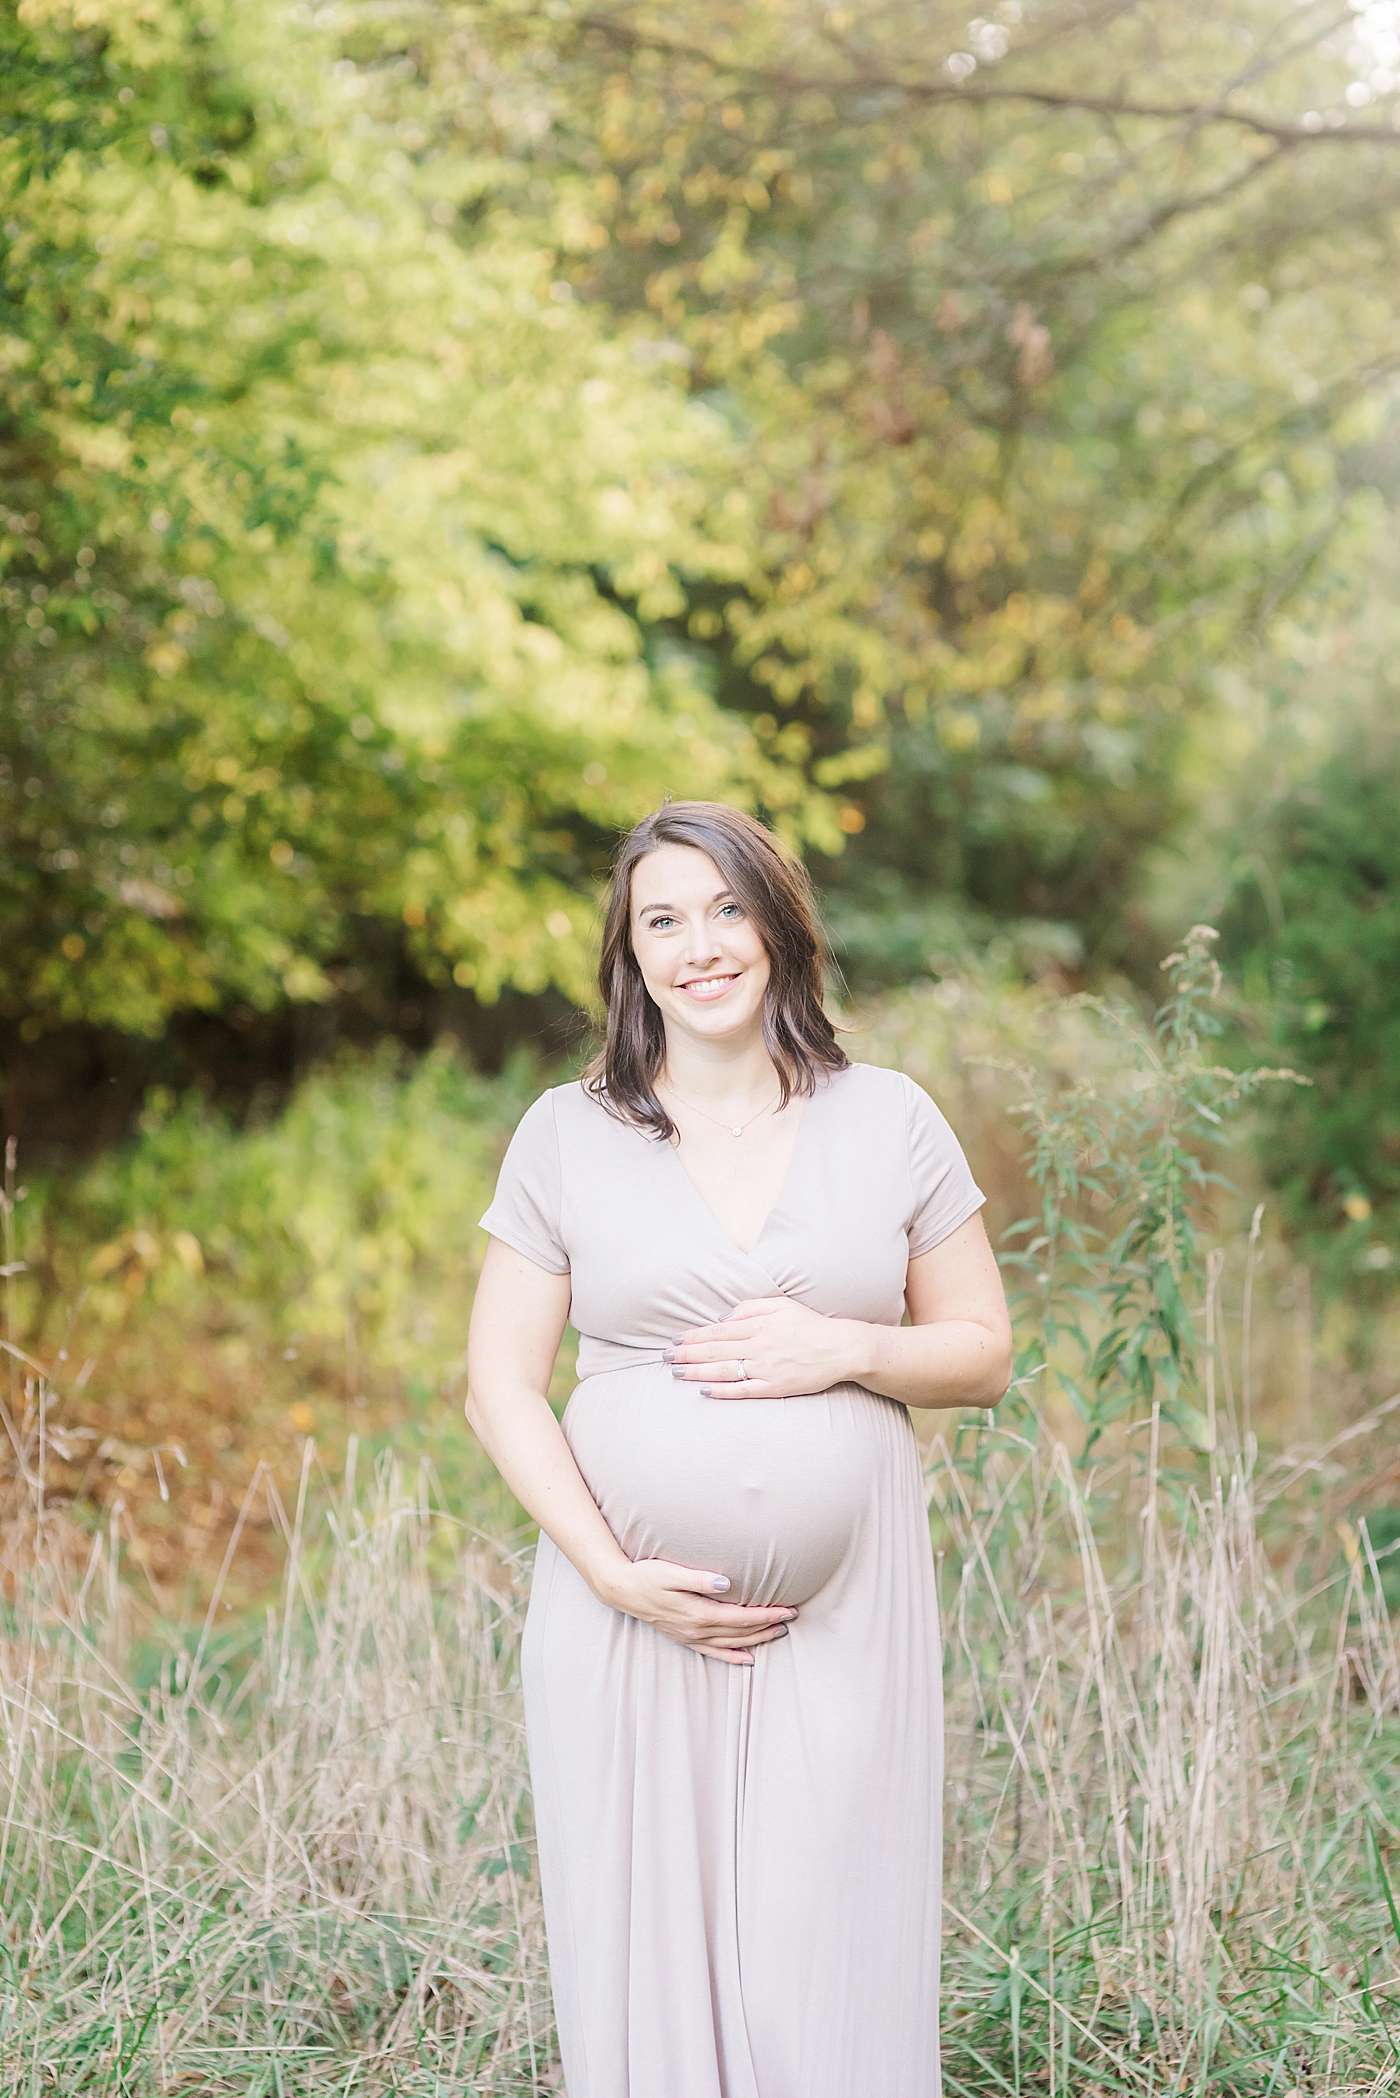 Mom to be smiling | Photo by Davidson Maternity Photographer Anna Wisjo